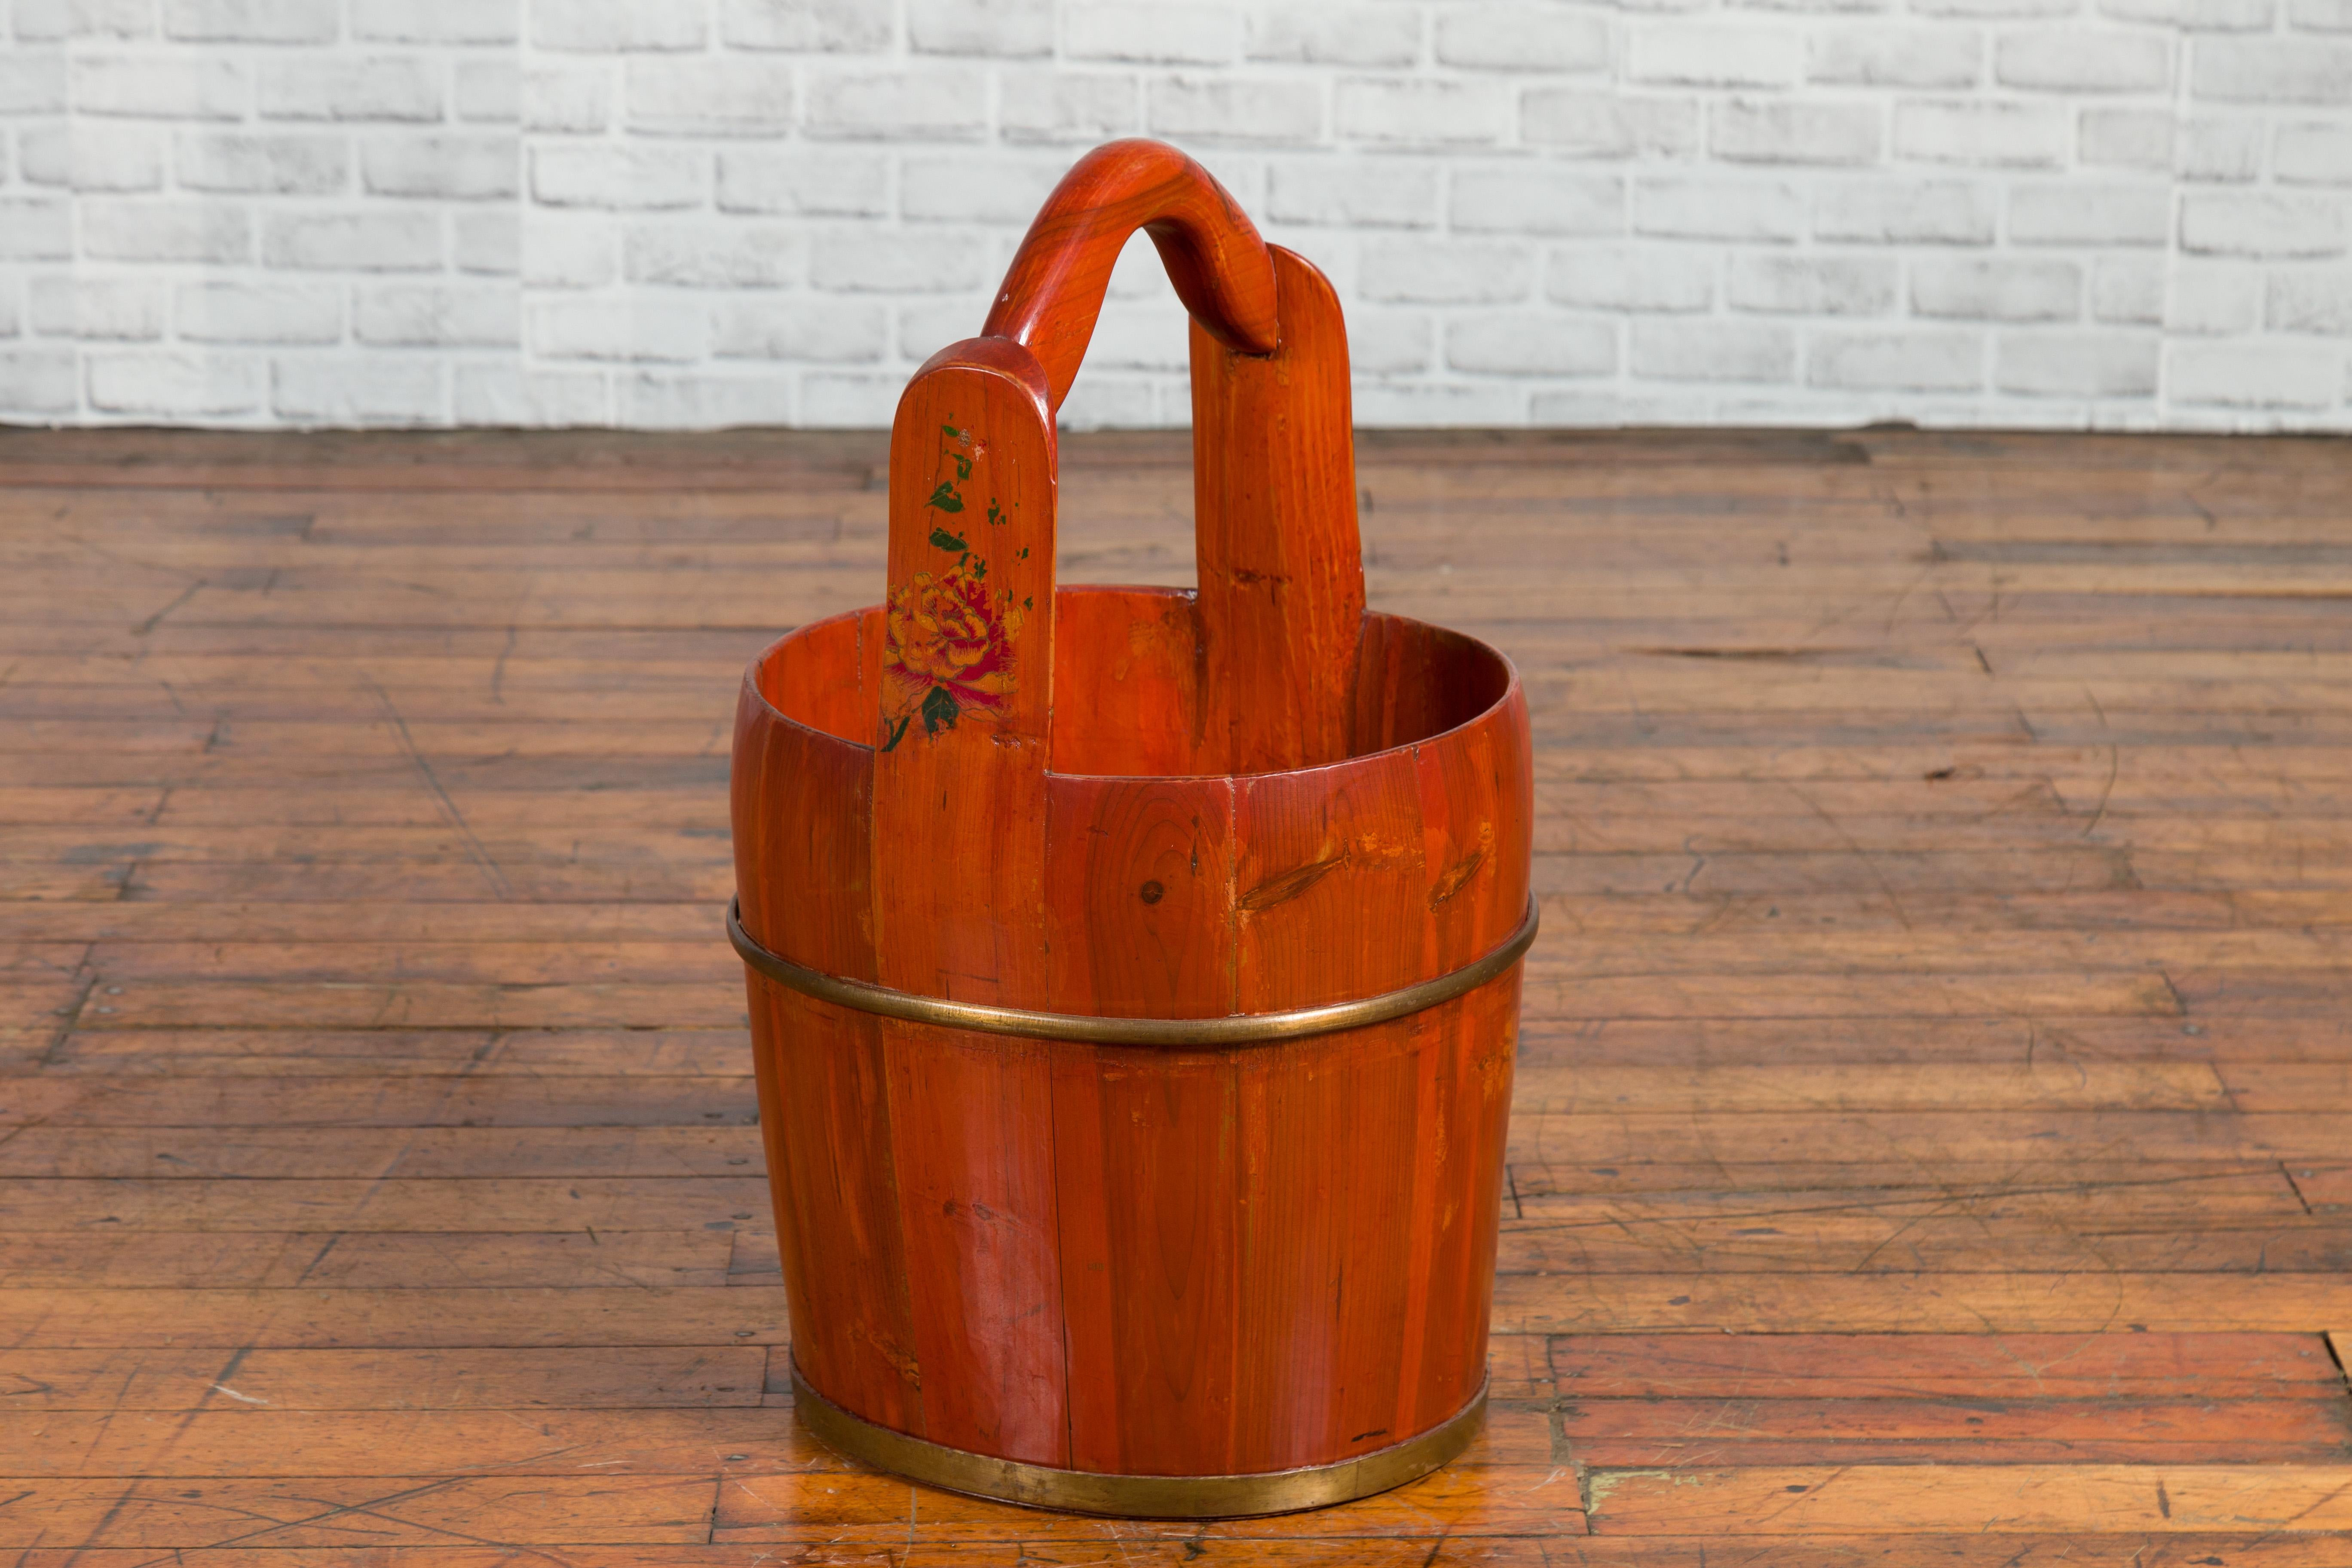 20th Century Chinese Rustic Wooden Bucket with Large Handle and Painted Floral Motifs For Sale